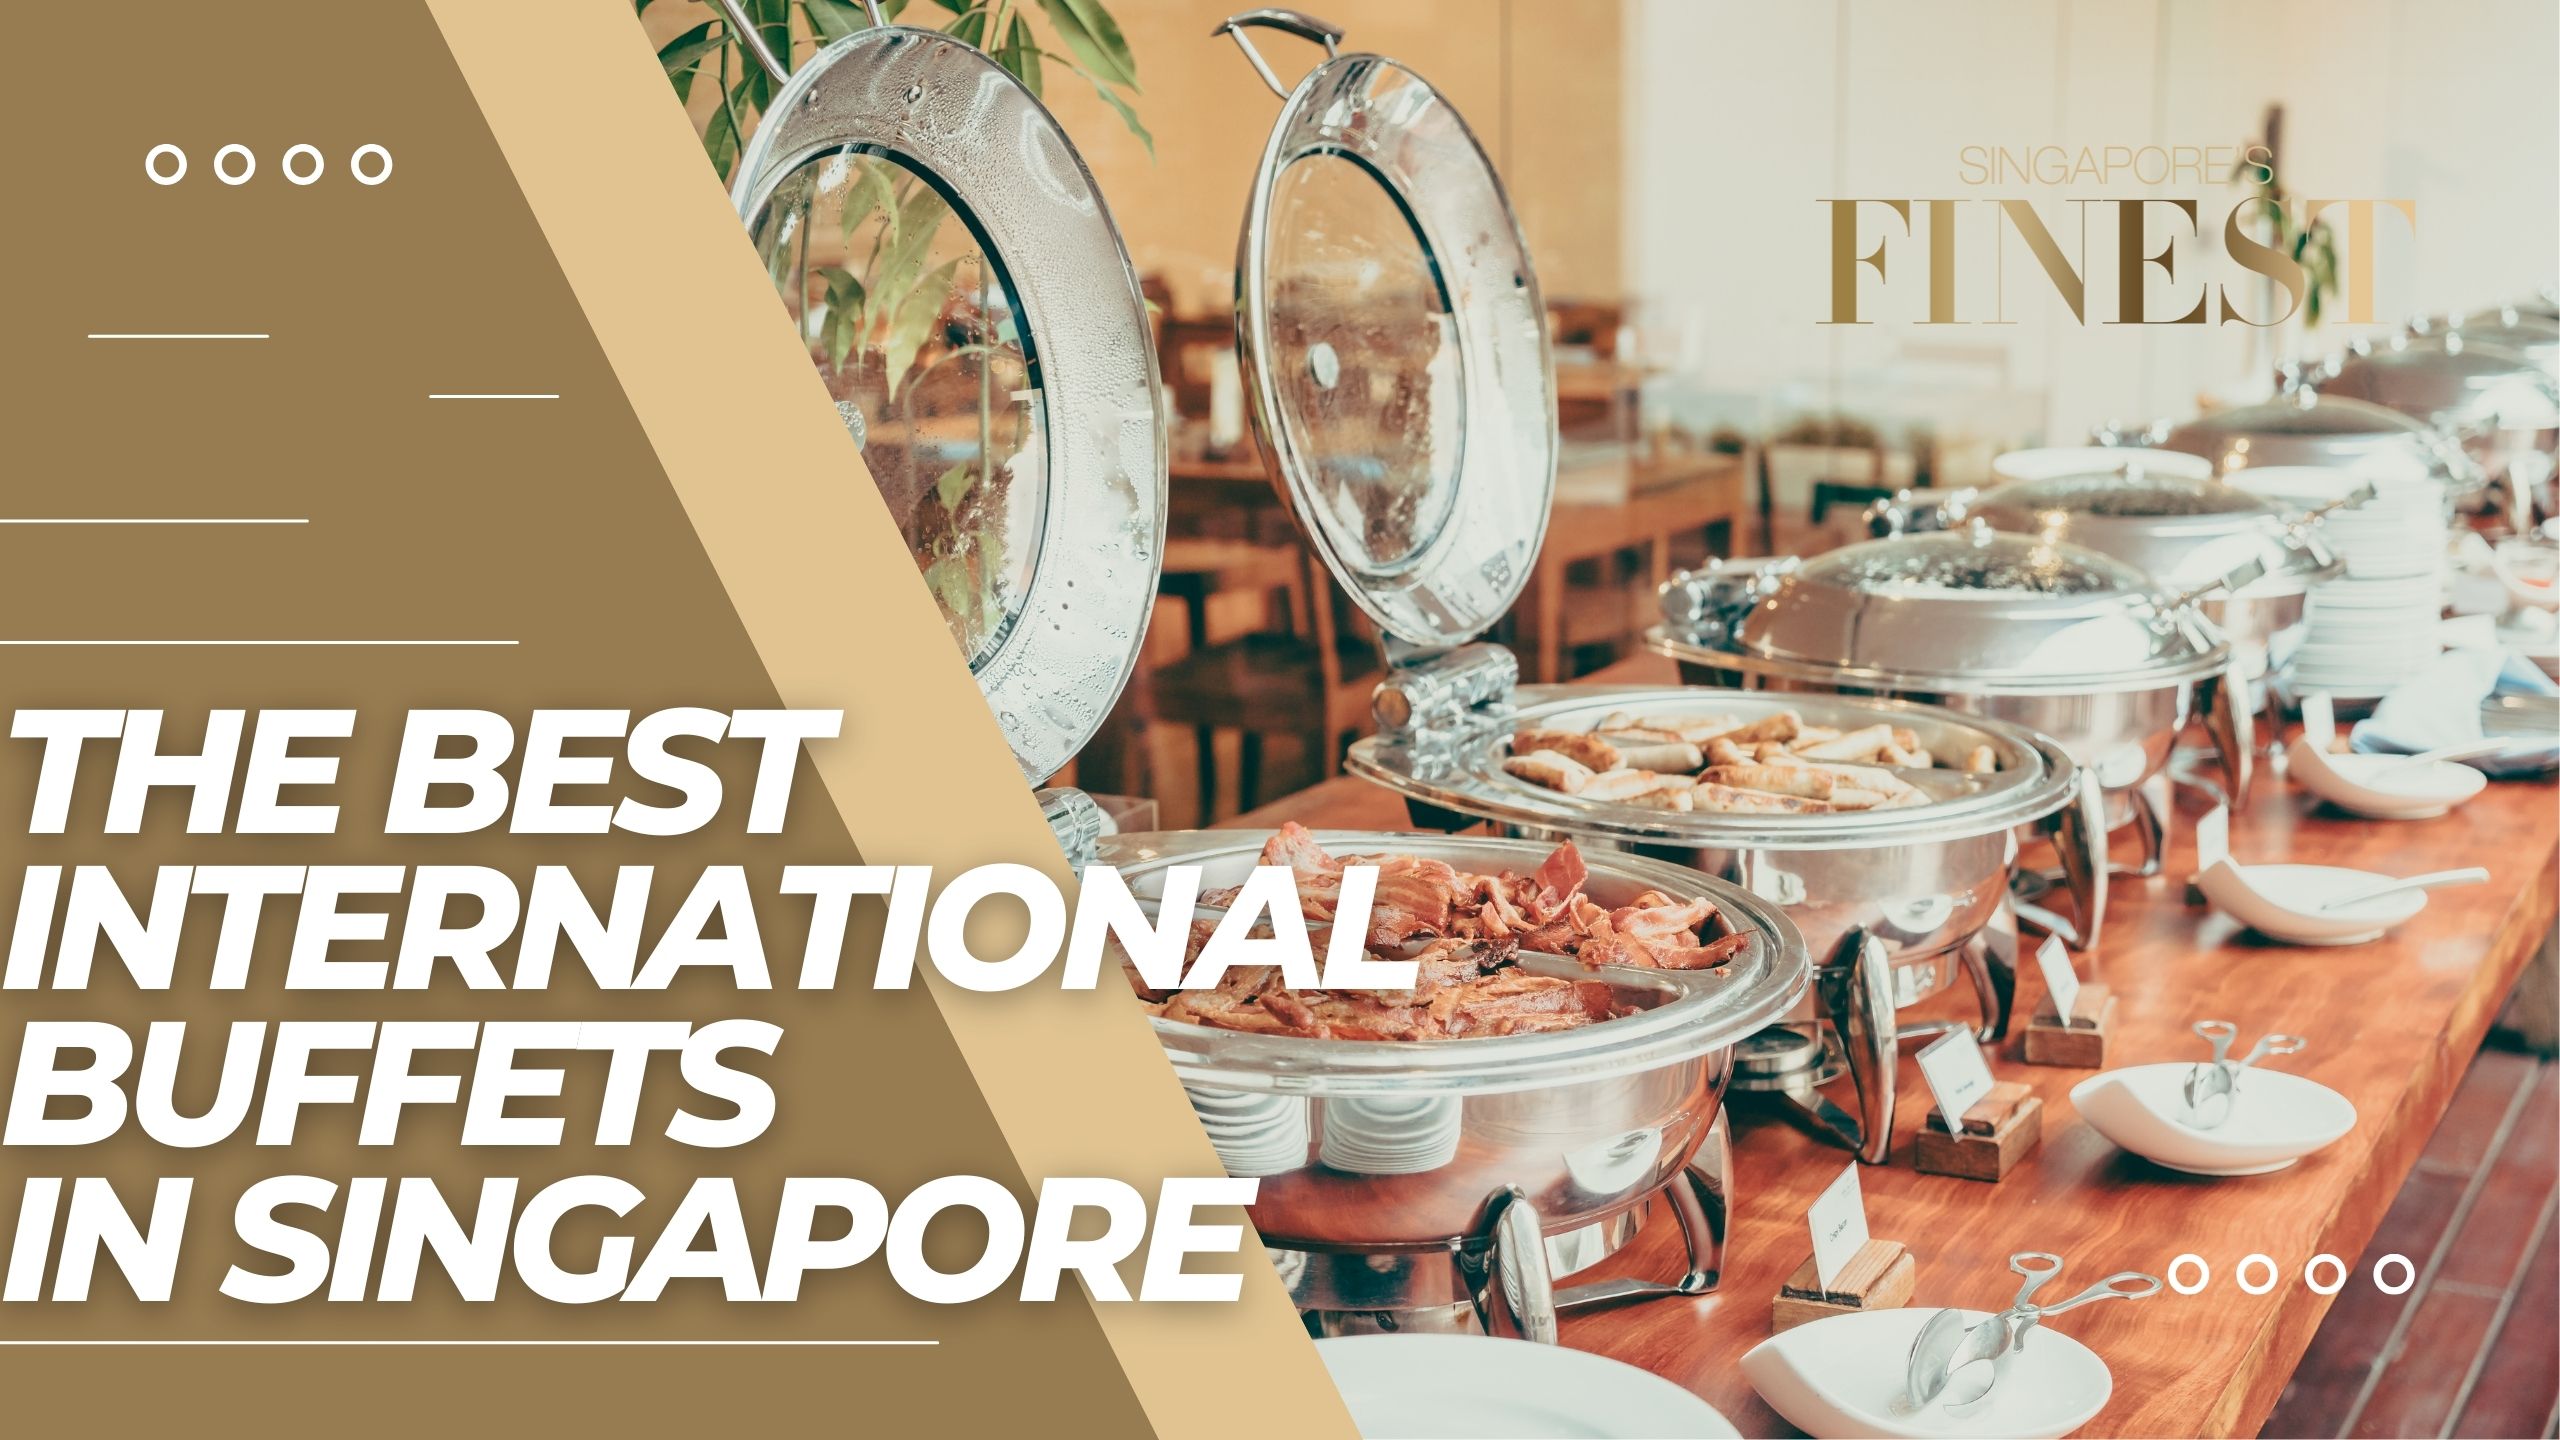 The Finest International Buffets in Singapore